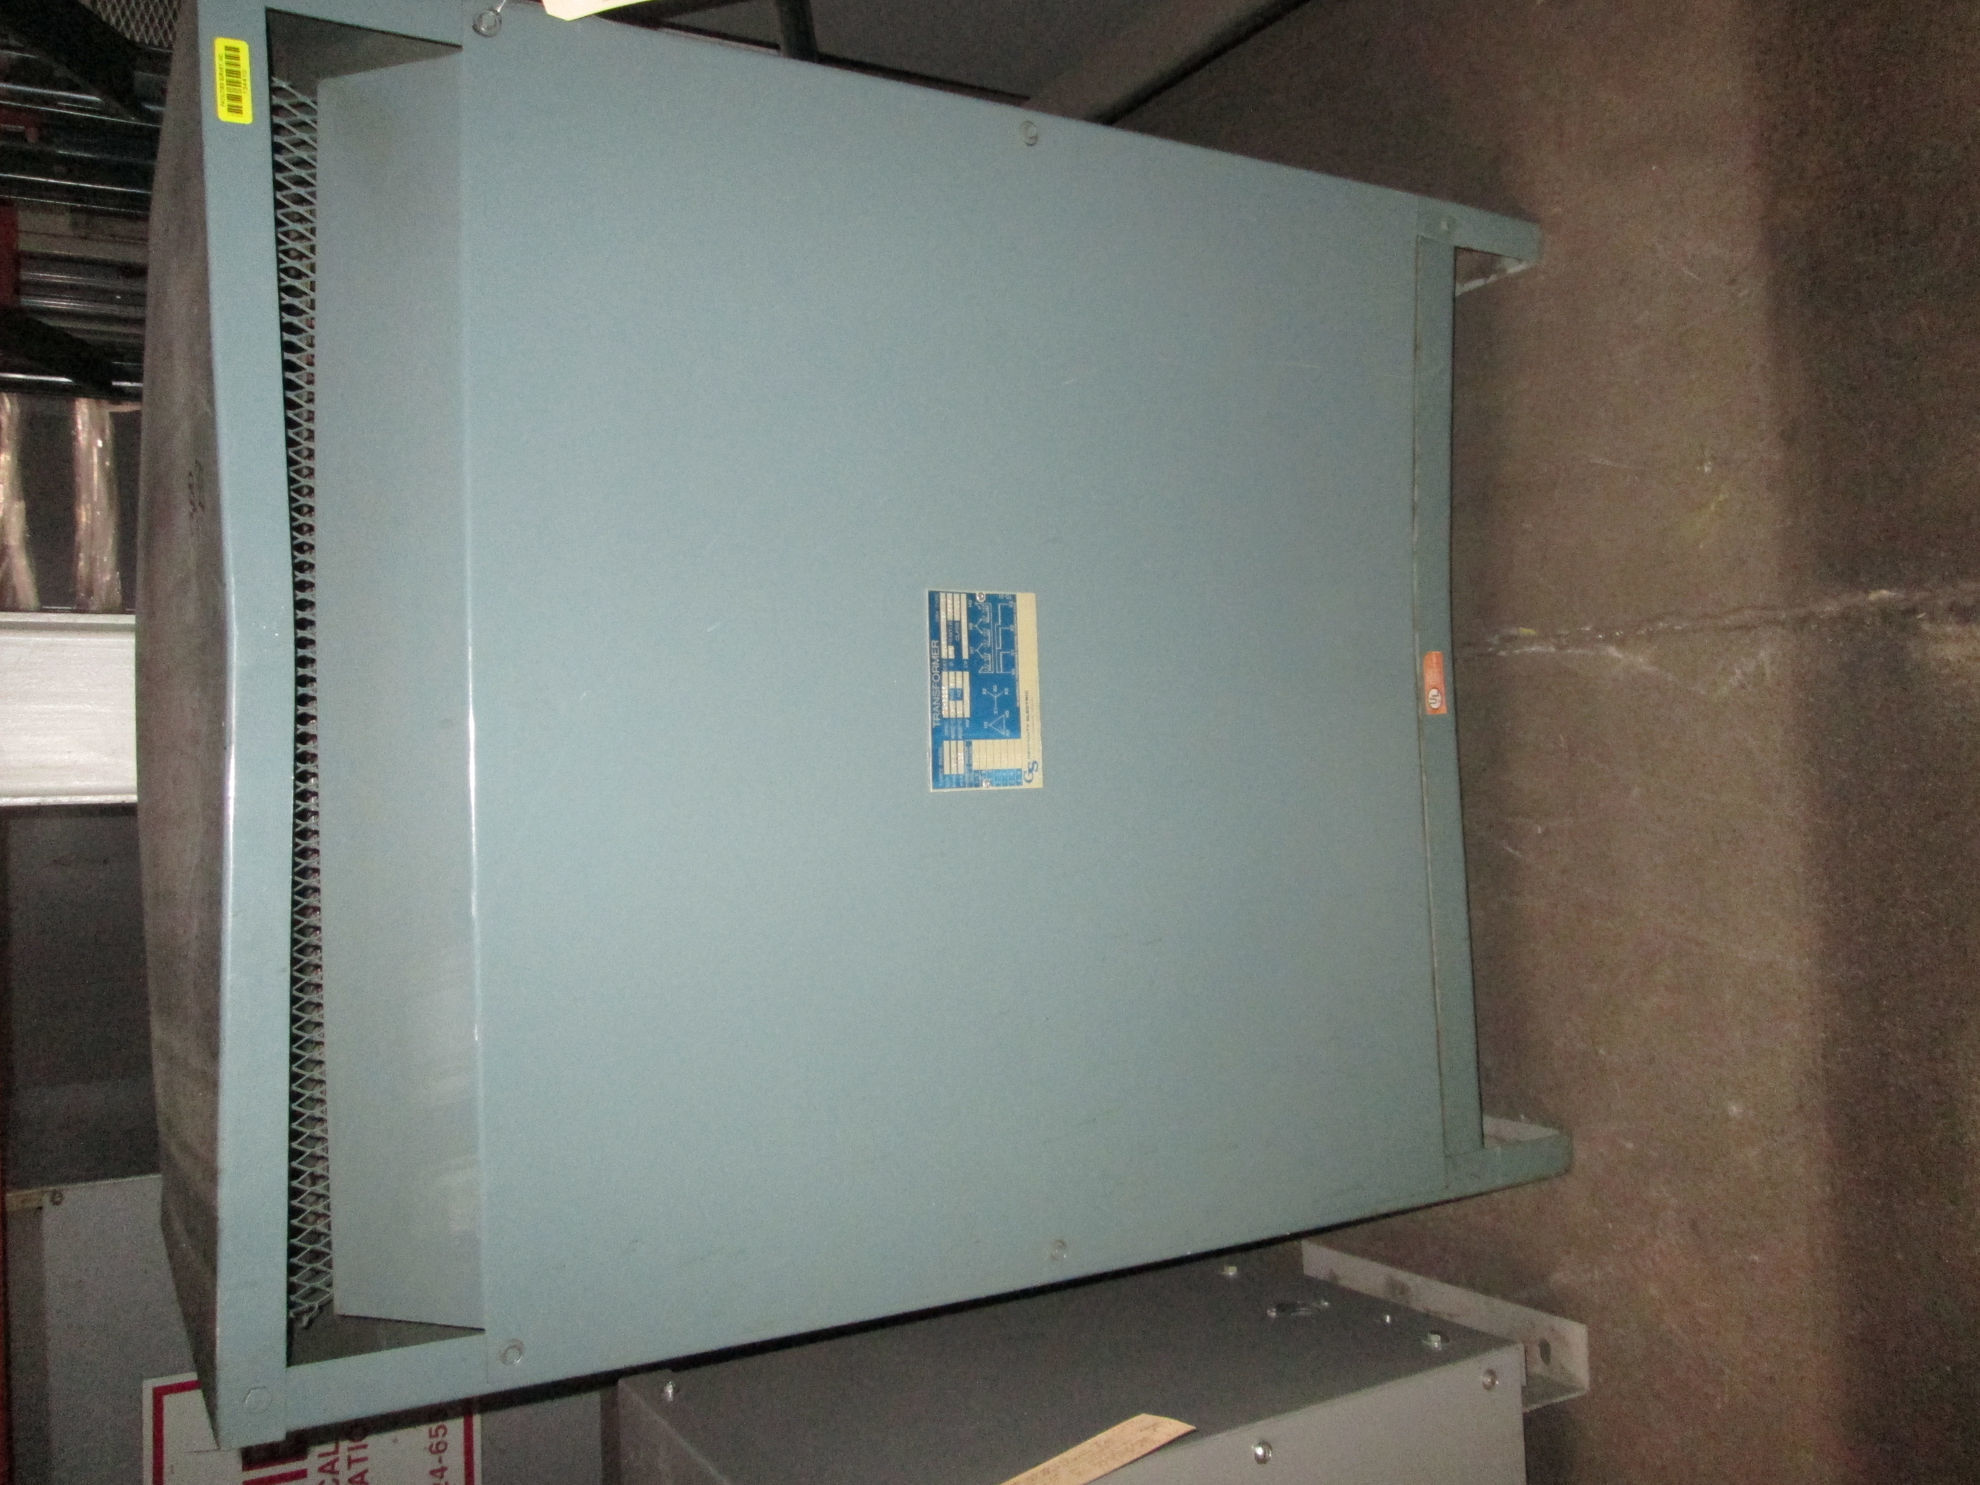 Picture of Hevi-Duty 300/225 KVA 480-208Y/120 Volt 3 Phase Low Voltage Dry Type Transformer R&G